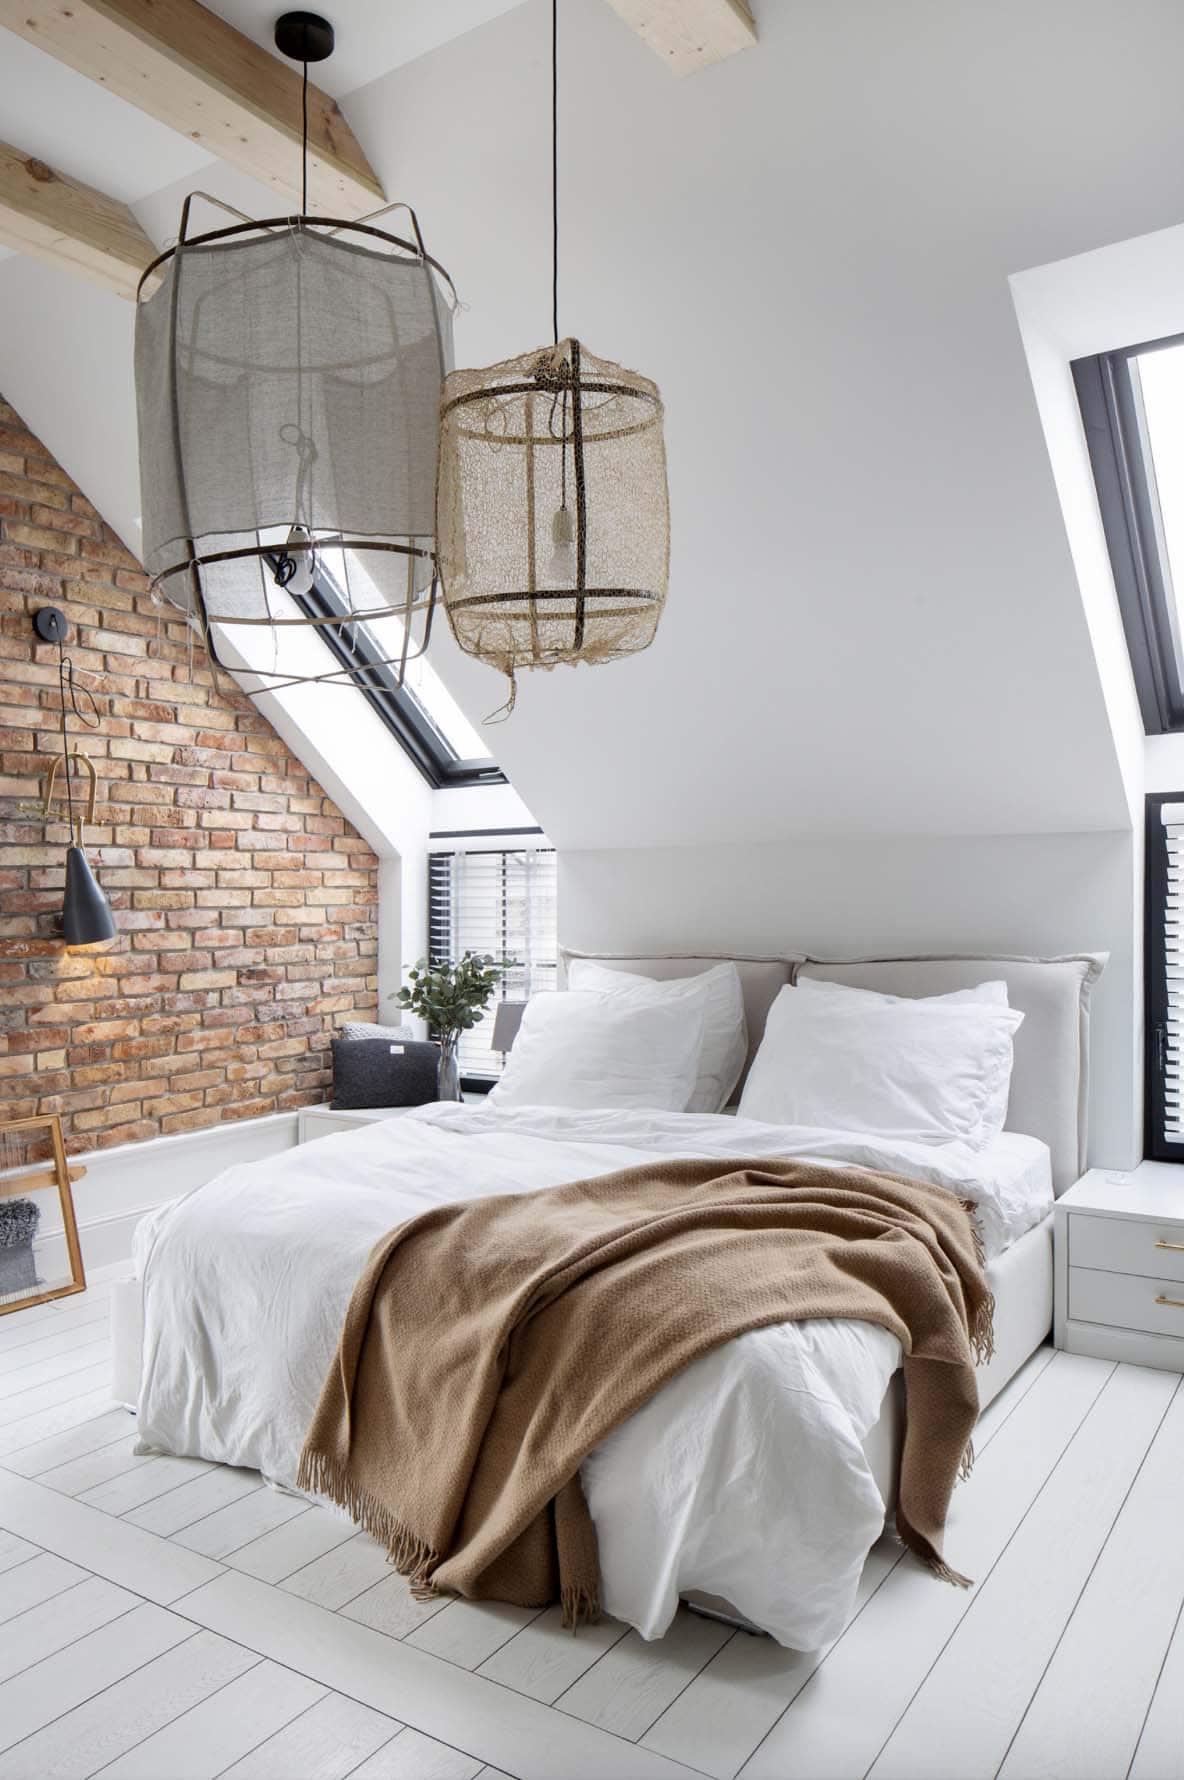 Scandinavian style bedroom with a sloped ceiling, large light fixtures and a brick accent wall